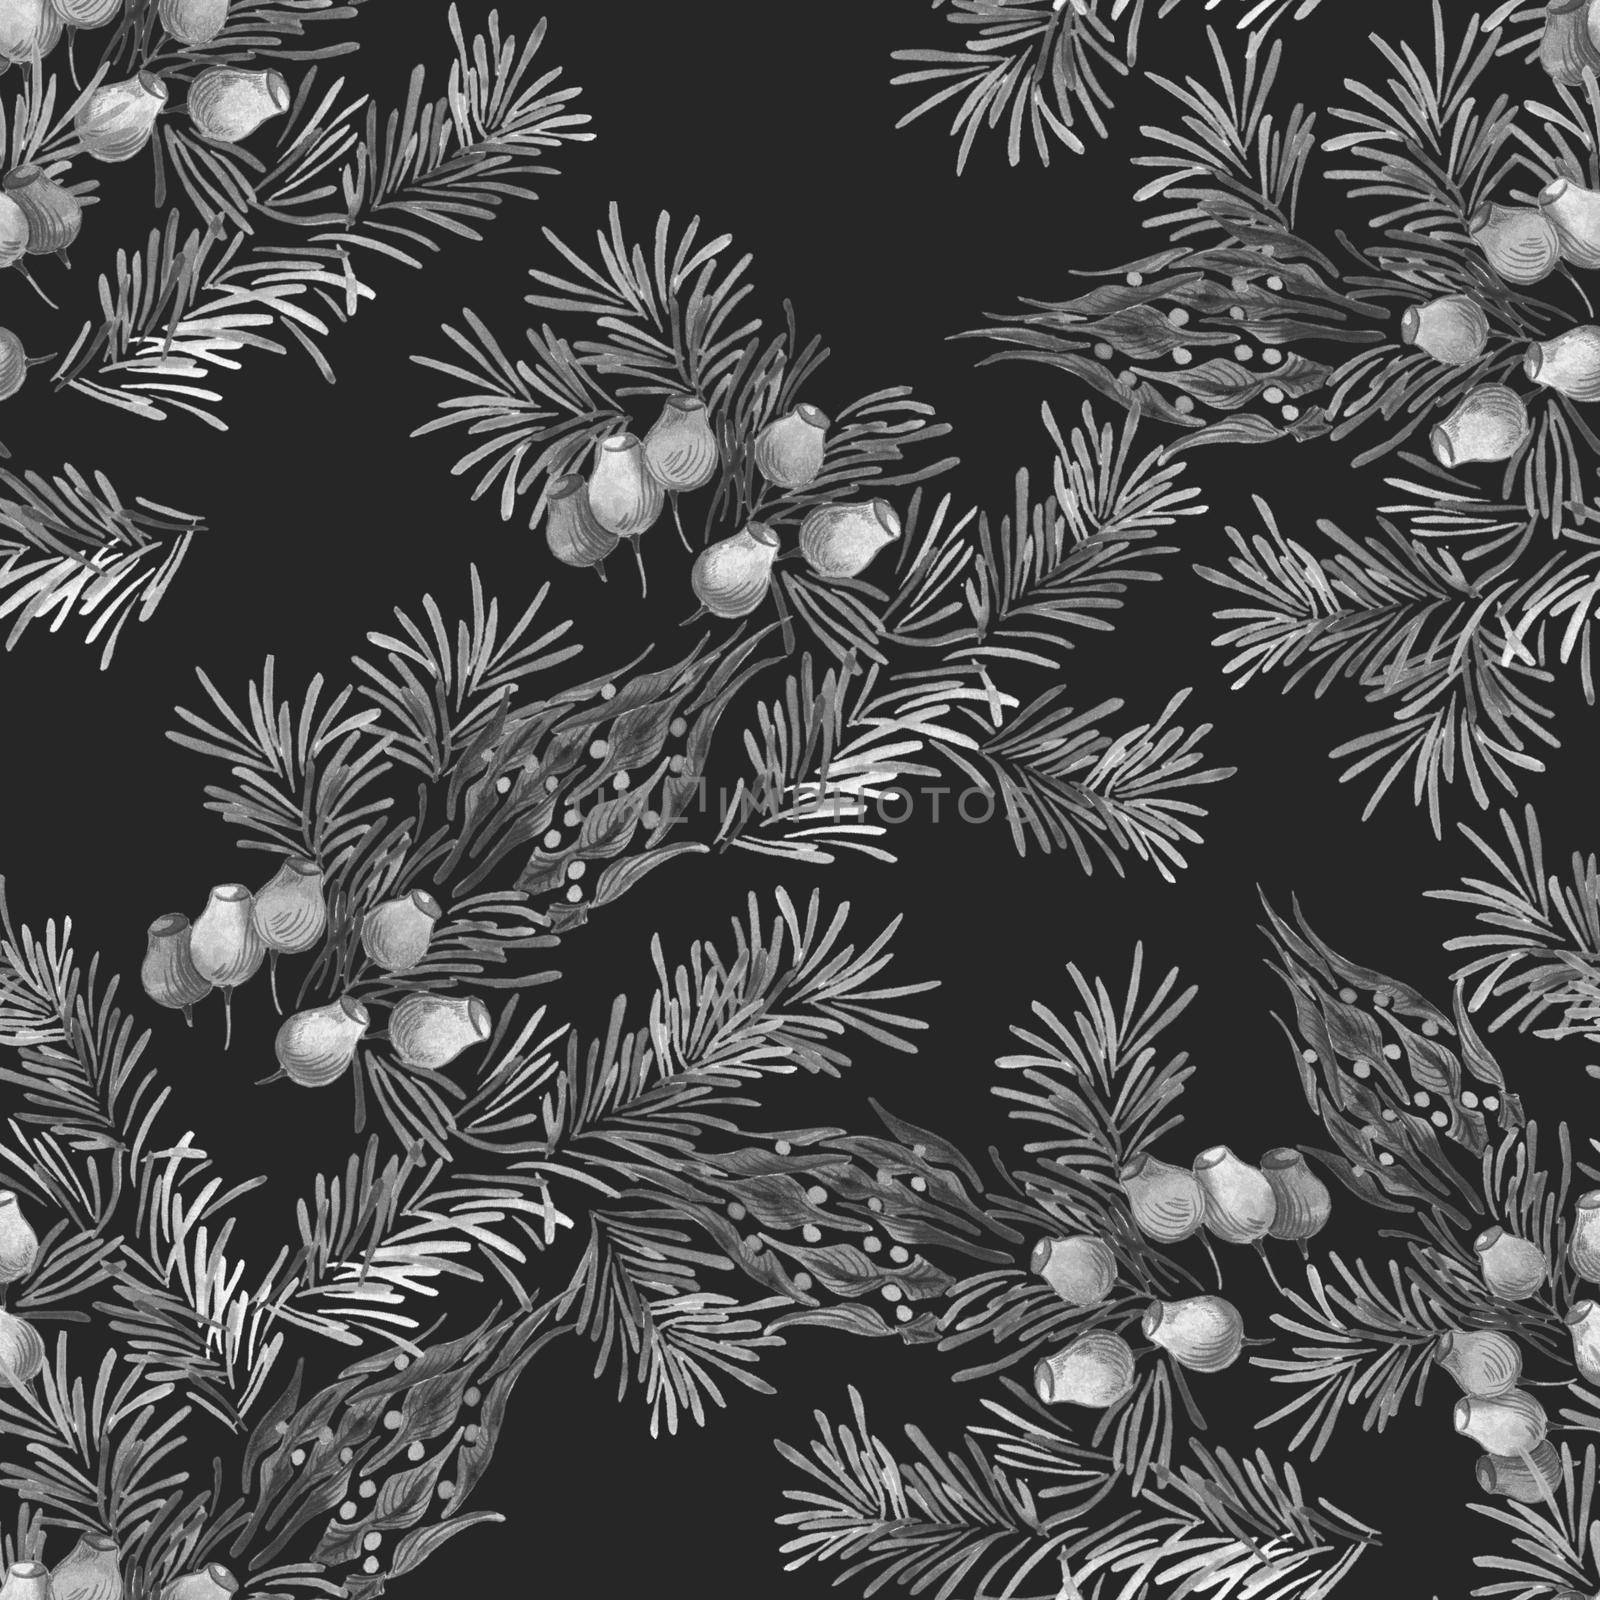 Seamless pattern of pine fir branches of Christmas tree with cones and flowers decorative design element by fireFLYart